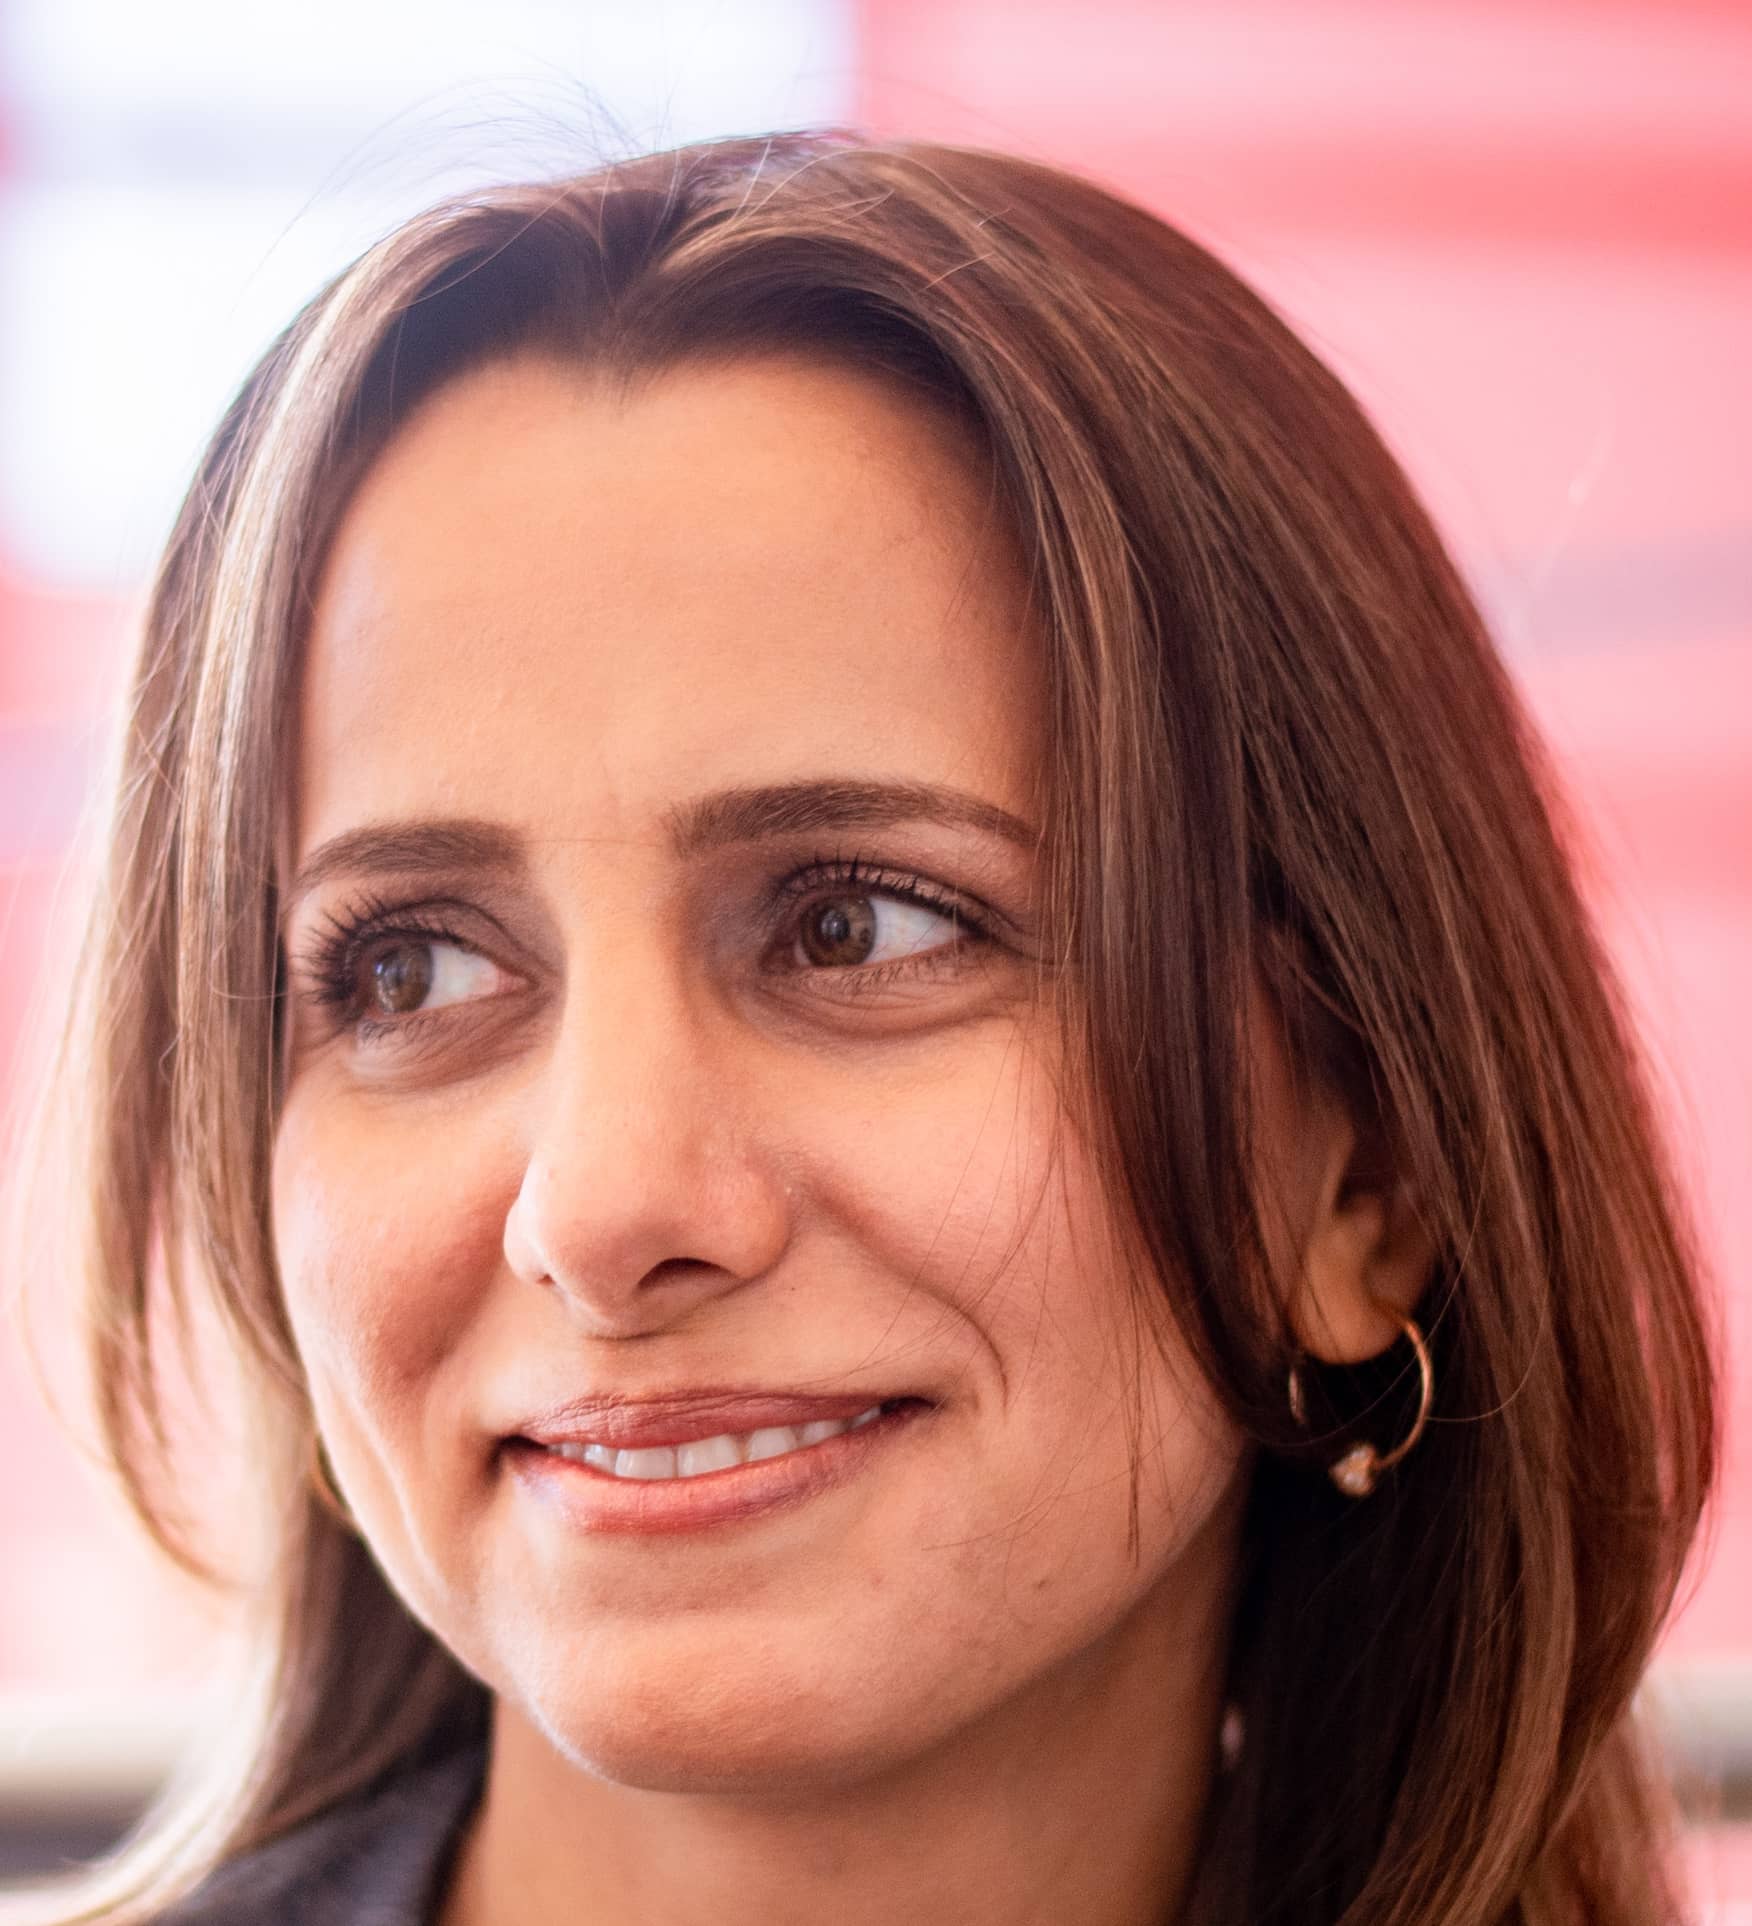 Rose Faghih, Ph.D., an assistant professor of electrical and computer engineering